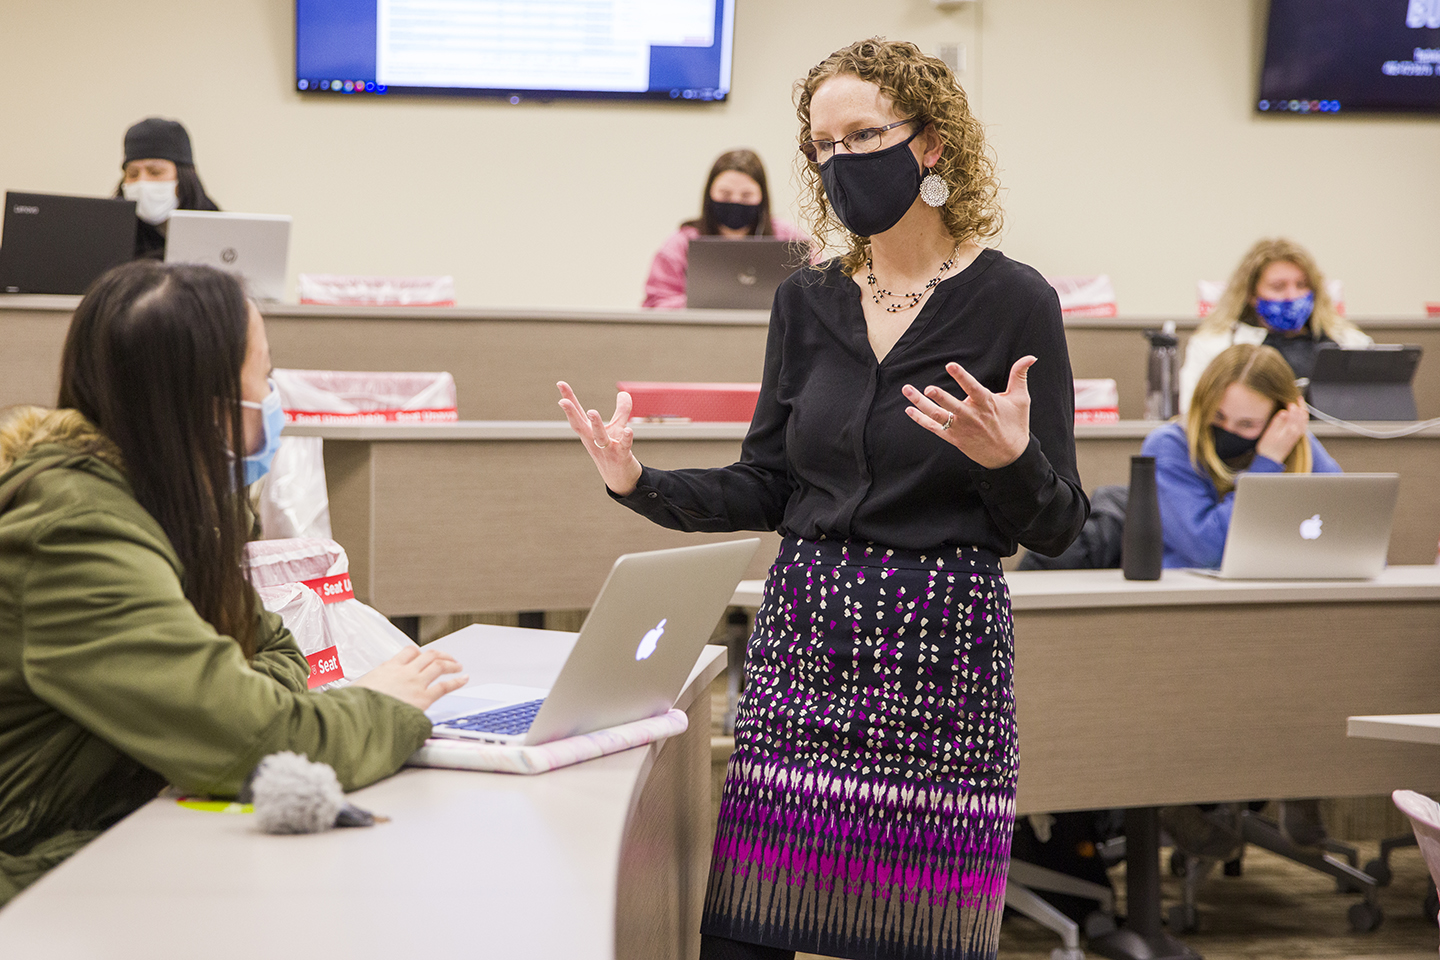 Accounting Improv Course Bolsters Students’ Communication Skills